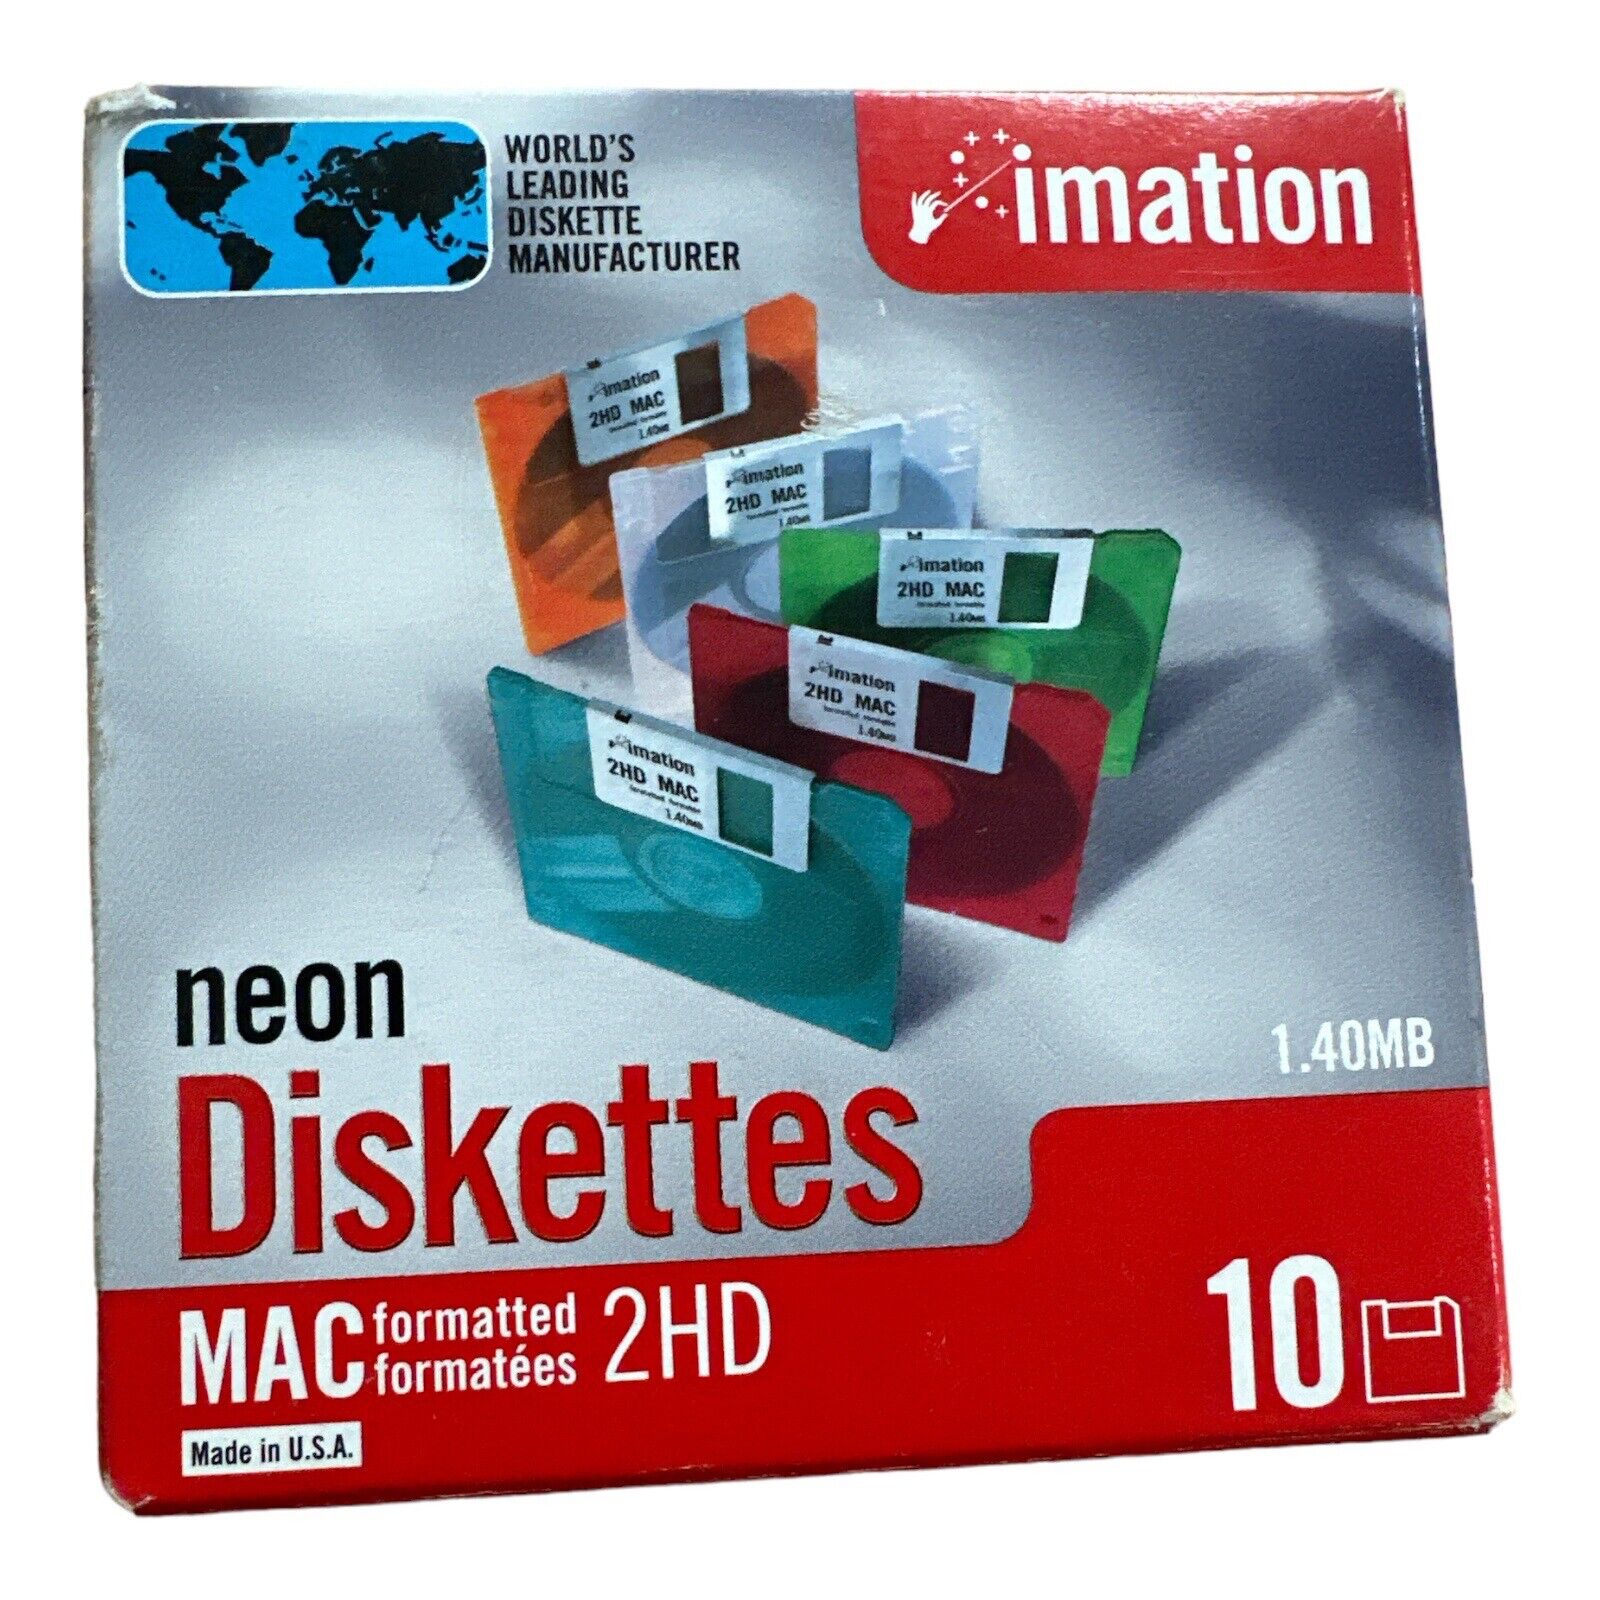 Imation Neon Diskettes 1.40 MB Mac Formatted 2HD Floppy Disks 10 Pack Colorful 